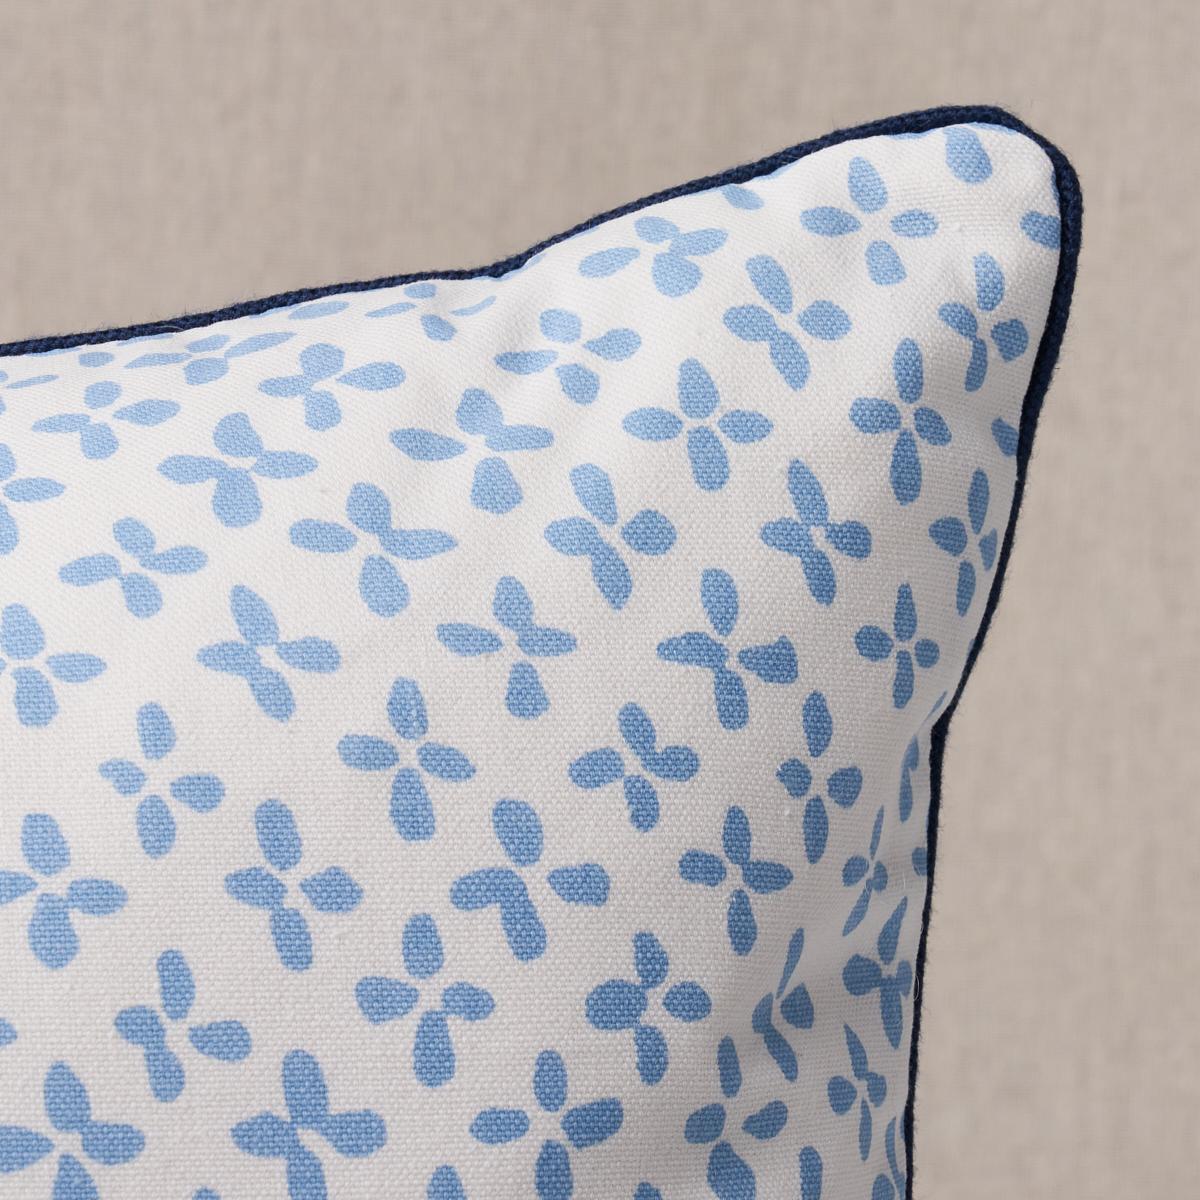 This pillow features Emerson. Inspired by a quatrefoil, Emerson in sky is a fun small-scale print with a big personality. Imperfect by design, this casual cotton fabric has a lovely hand-painted feel. Pillow is finished with a welt in Cedric Cotton